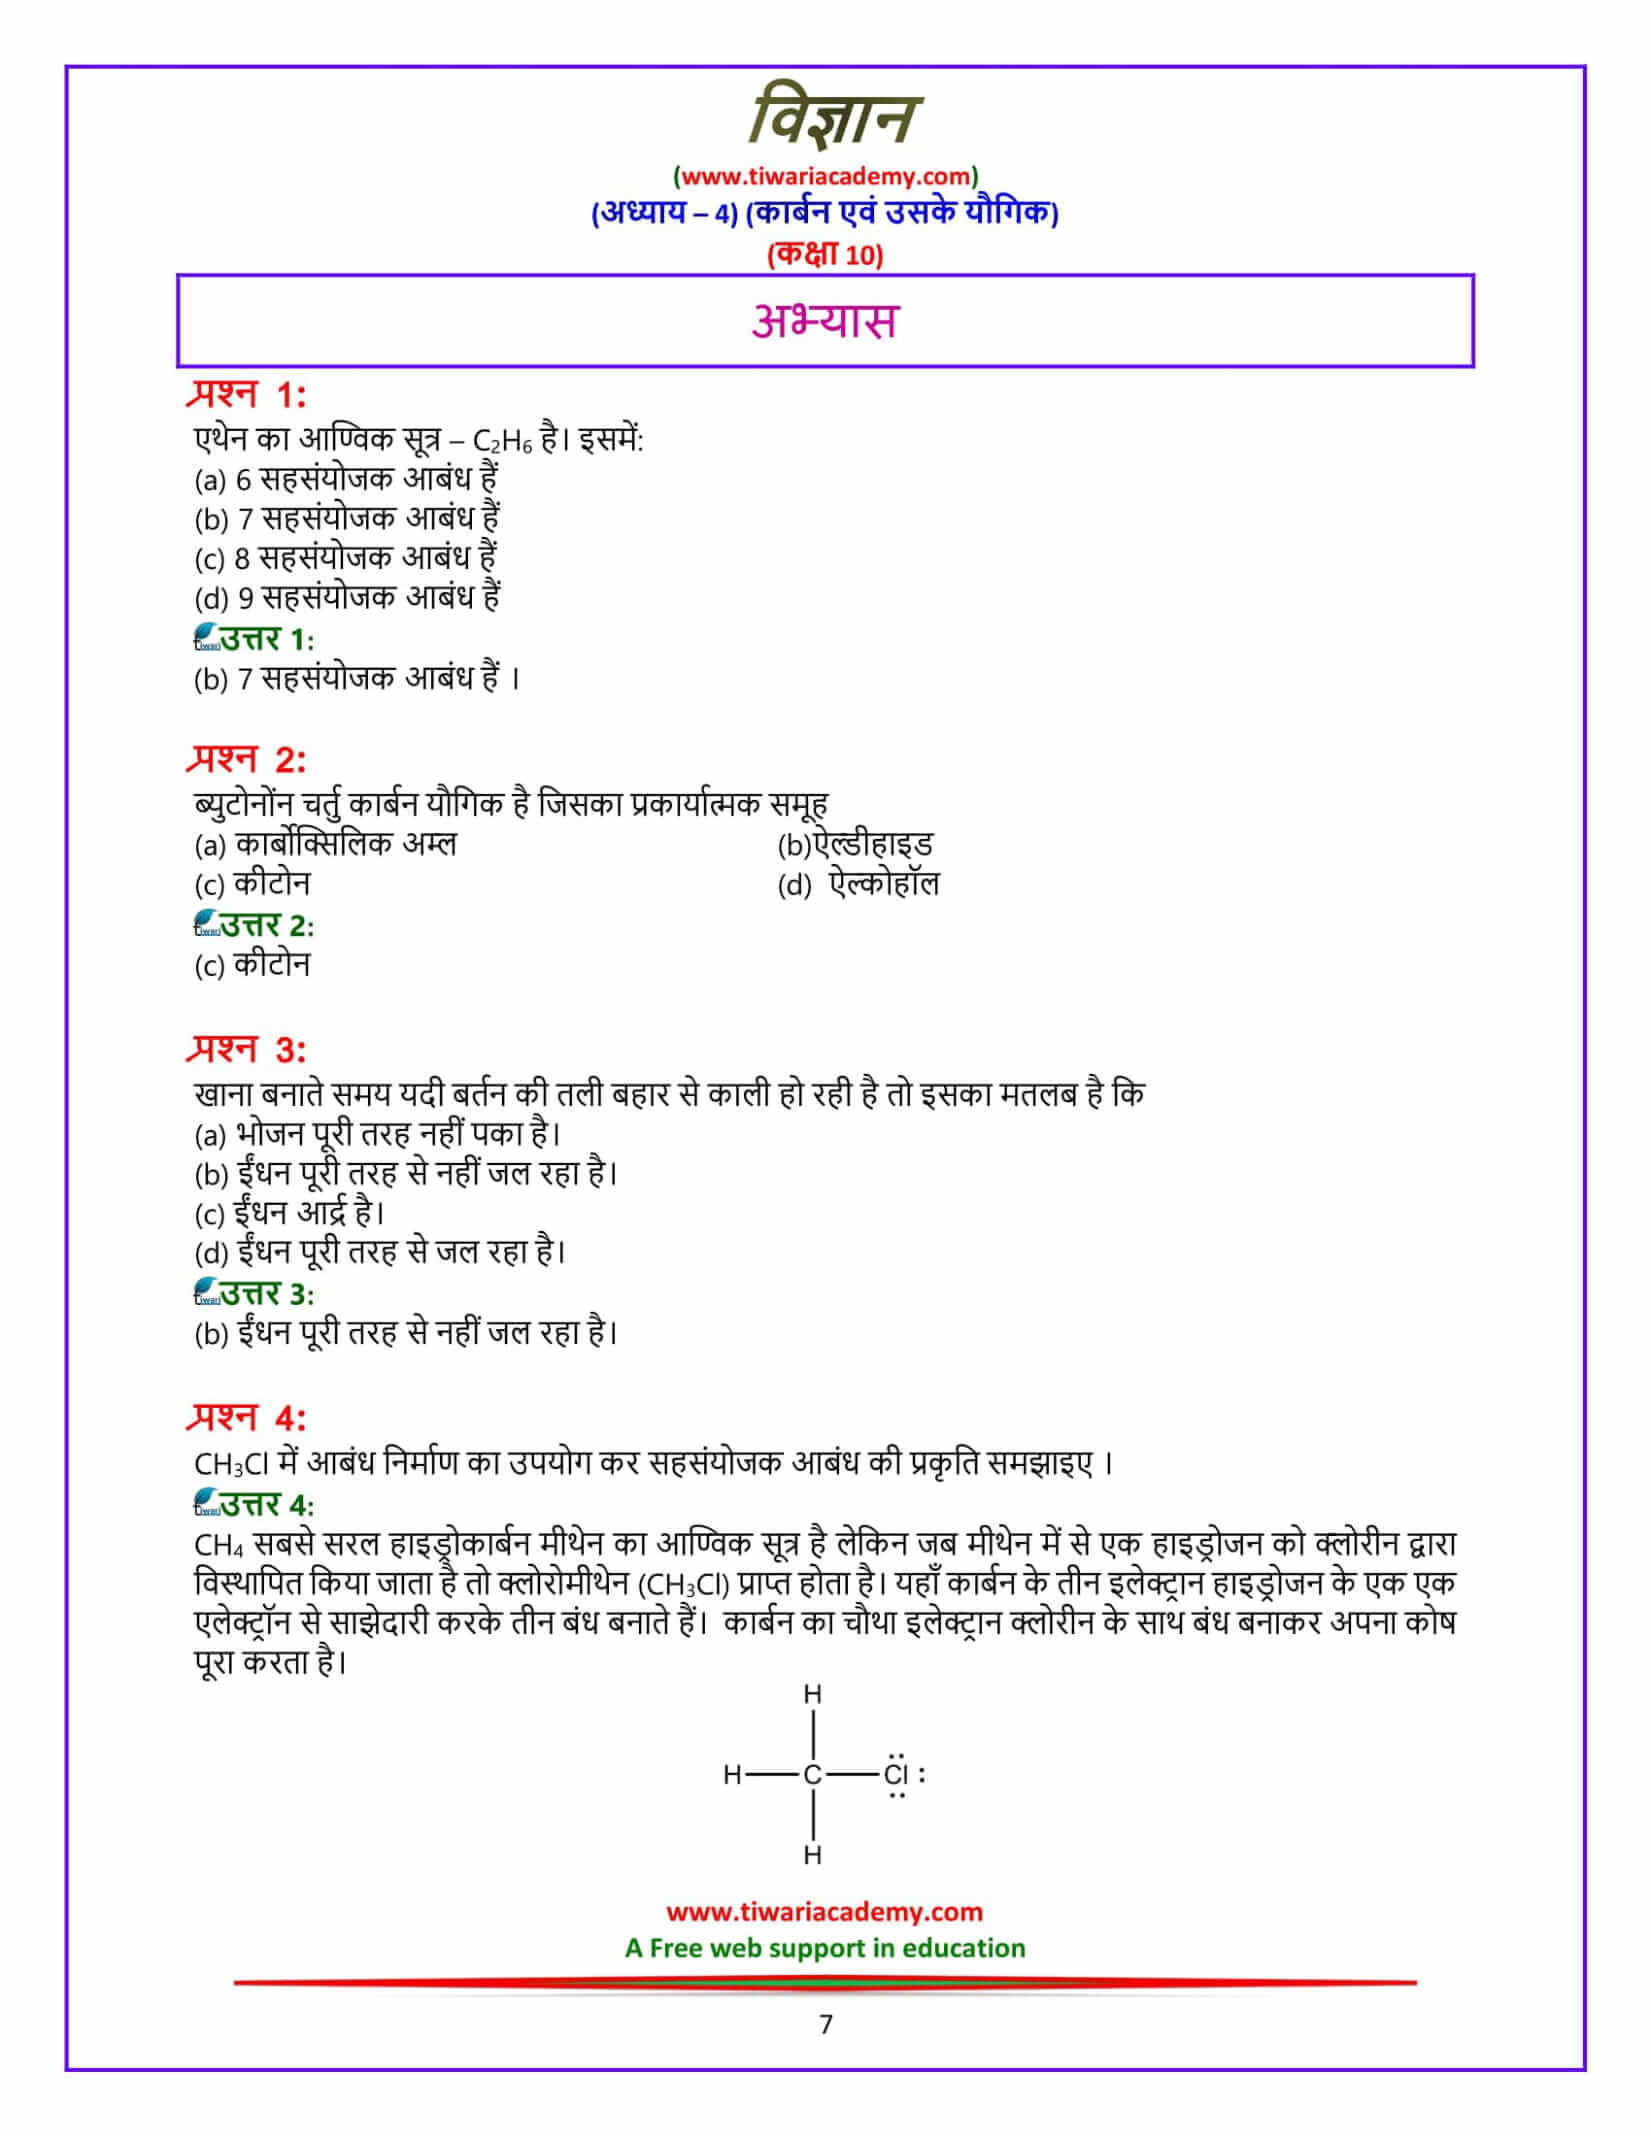 NCERT Solutions for Class 10 Science Chapter 4 Carbon and its compounds अभ्यास के प्रश्न उत्तर